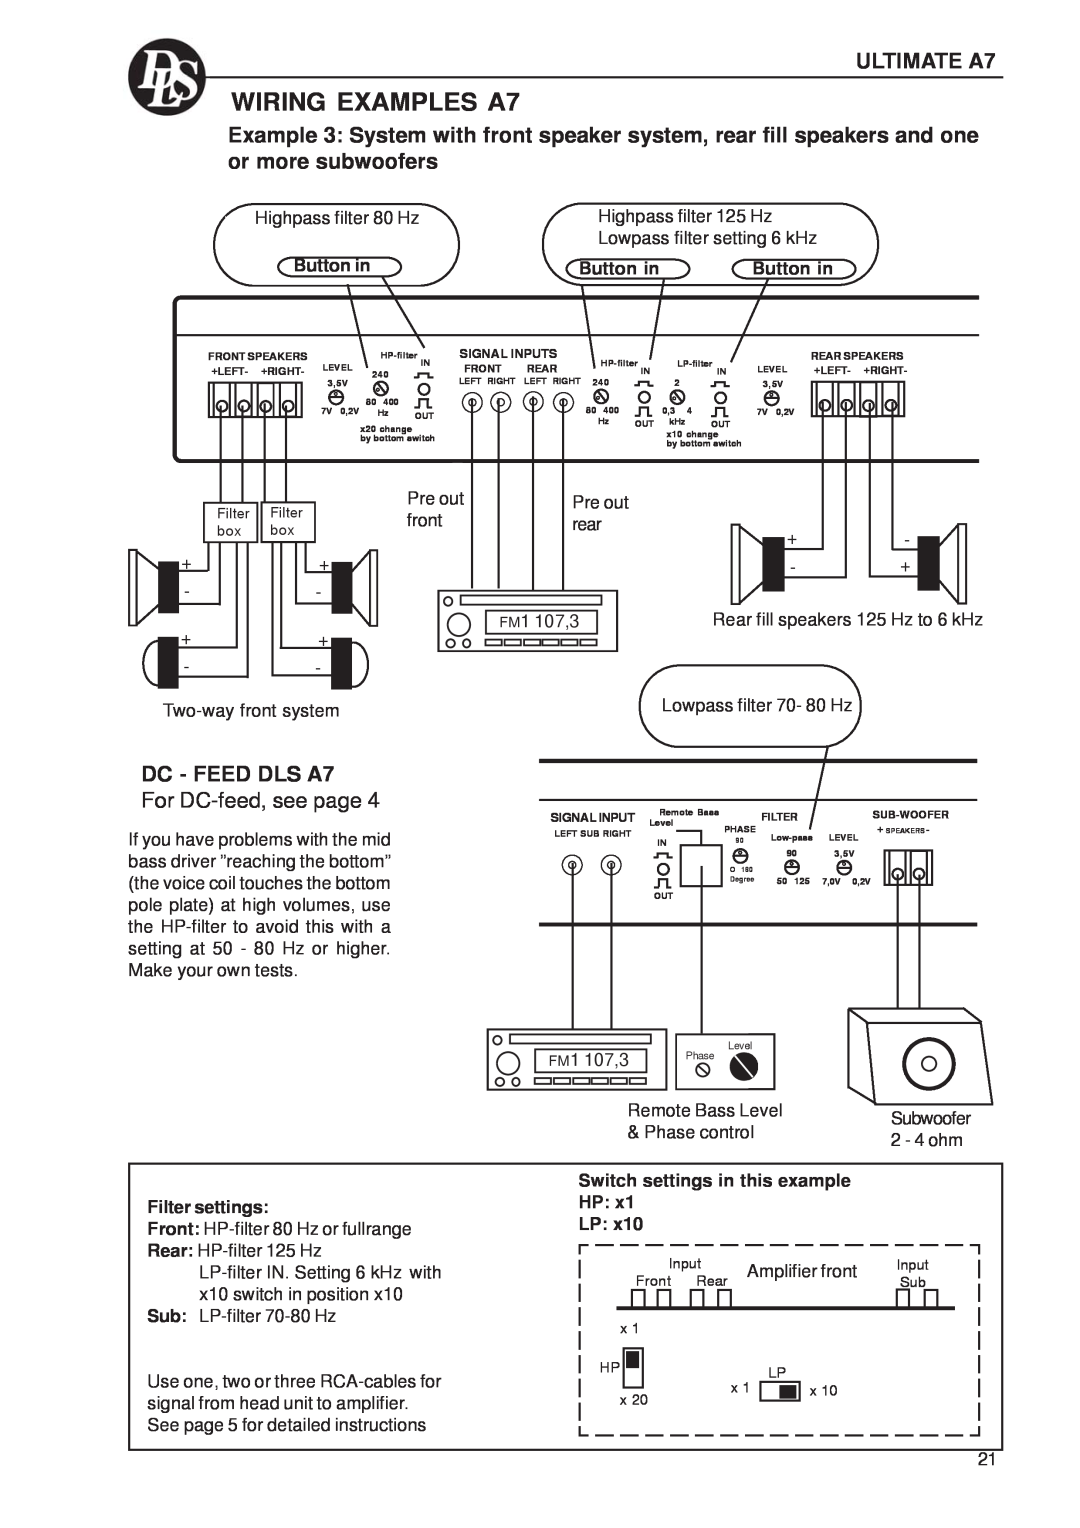 DLS Svenska AB Switch settings in this example, WIRING EXAMPLES A7, ULTIMATE A7, DC - FEED DLS A7, For DC-feed,see page 